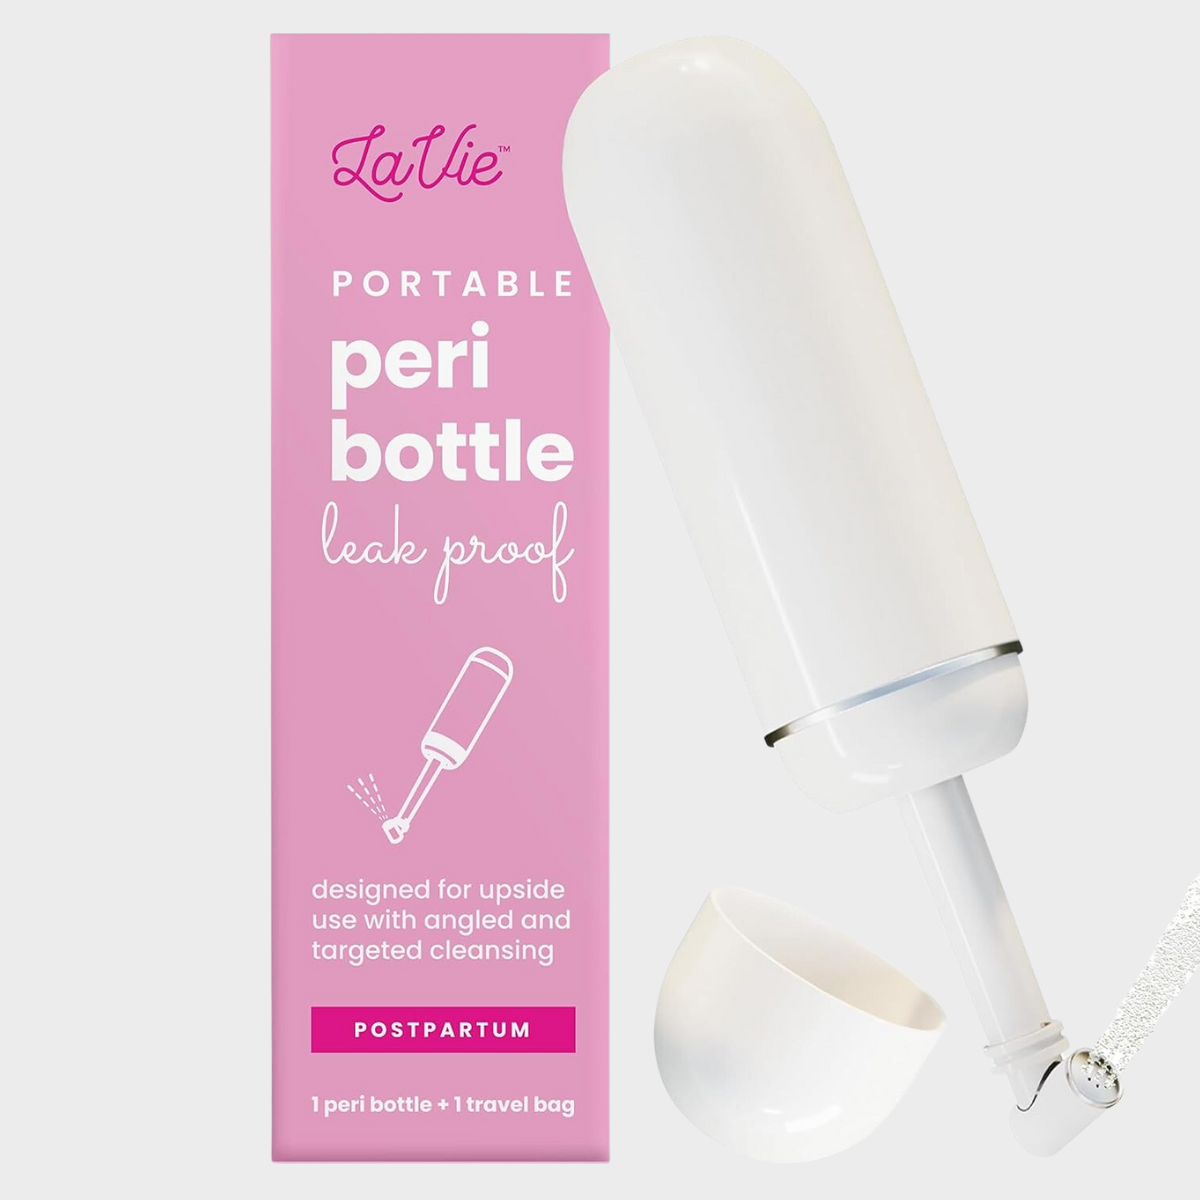 How to Use a Peri Bottle for Postpartum Pain